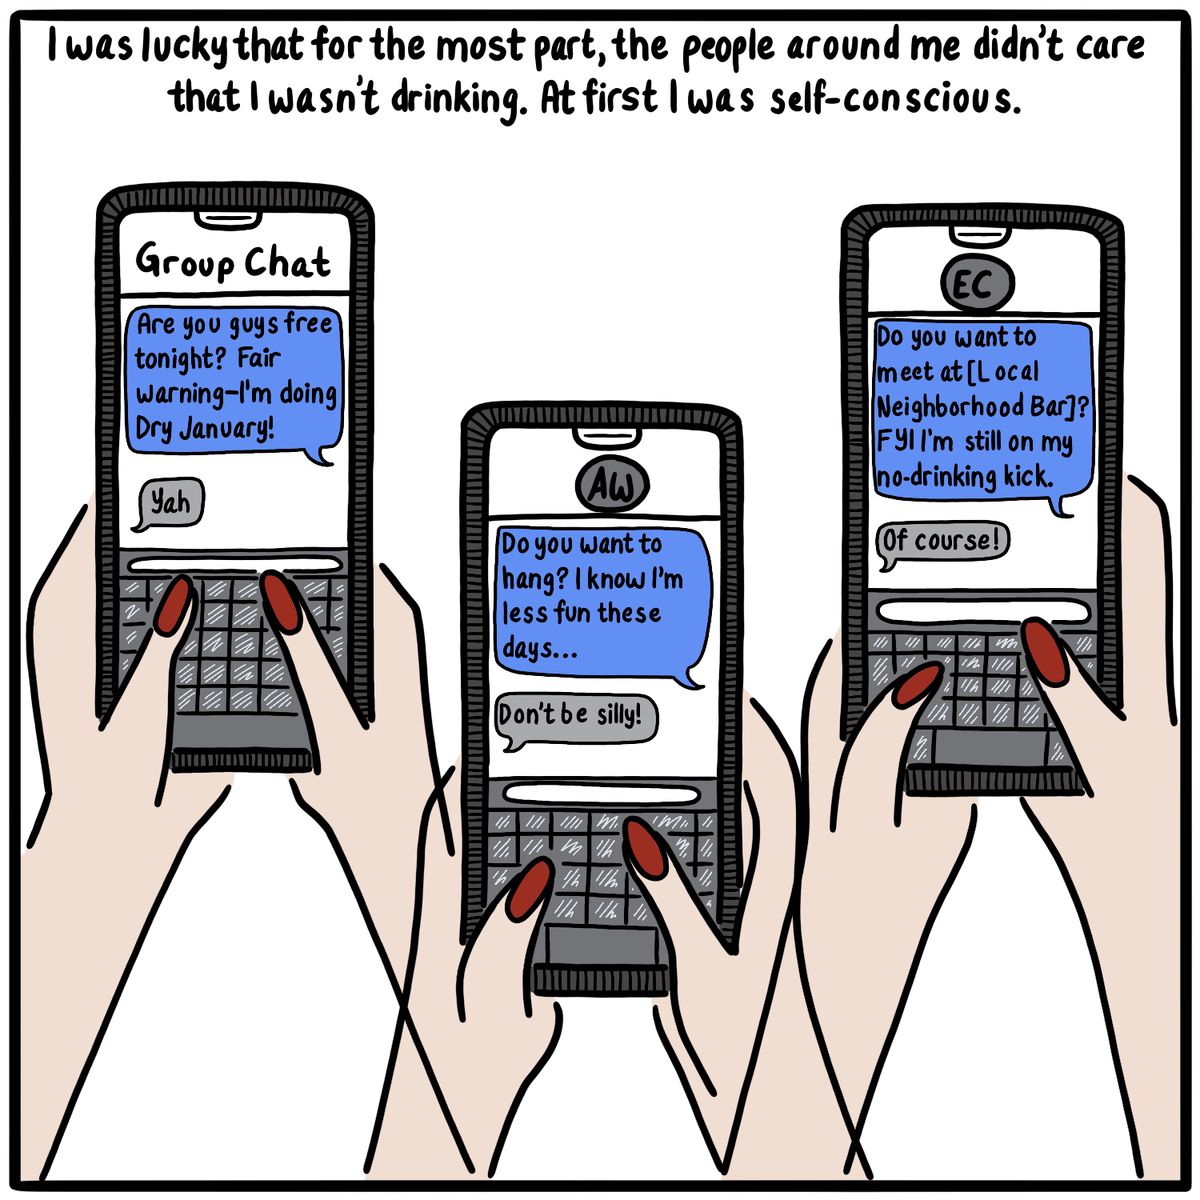 Three phone screens featuring snippets of conversations with friends. Caption reads “I was lucky that for the most part, the people around me didn’t care that I wasn’t drinking. At first I was self-conscious.”